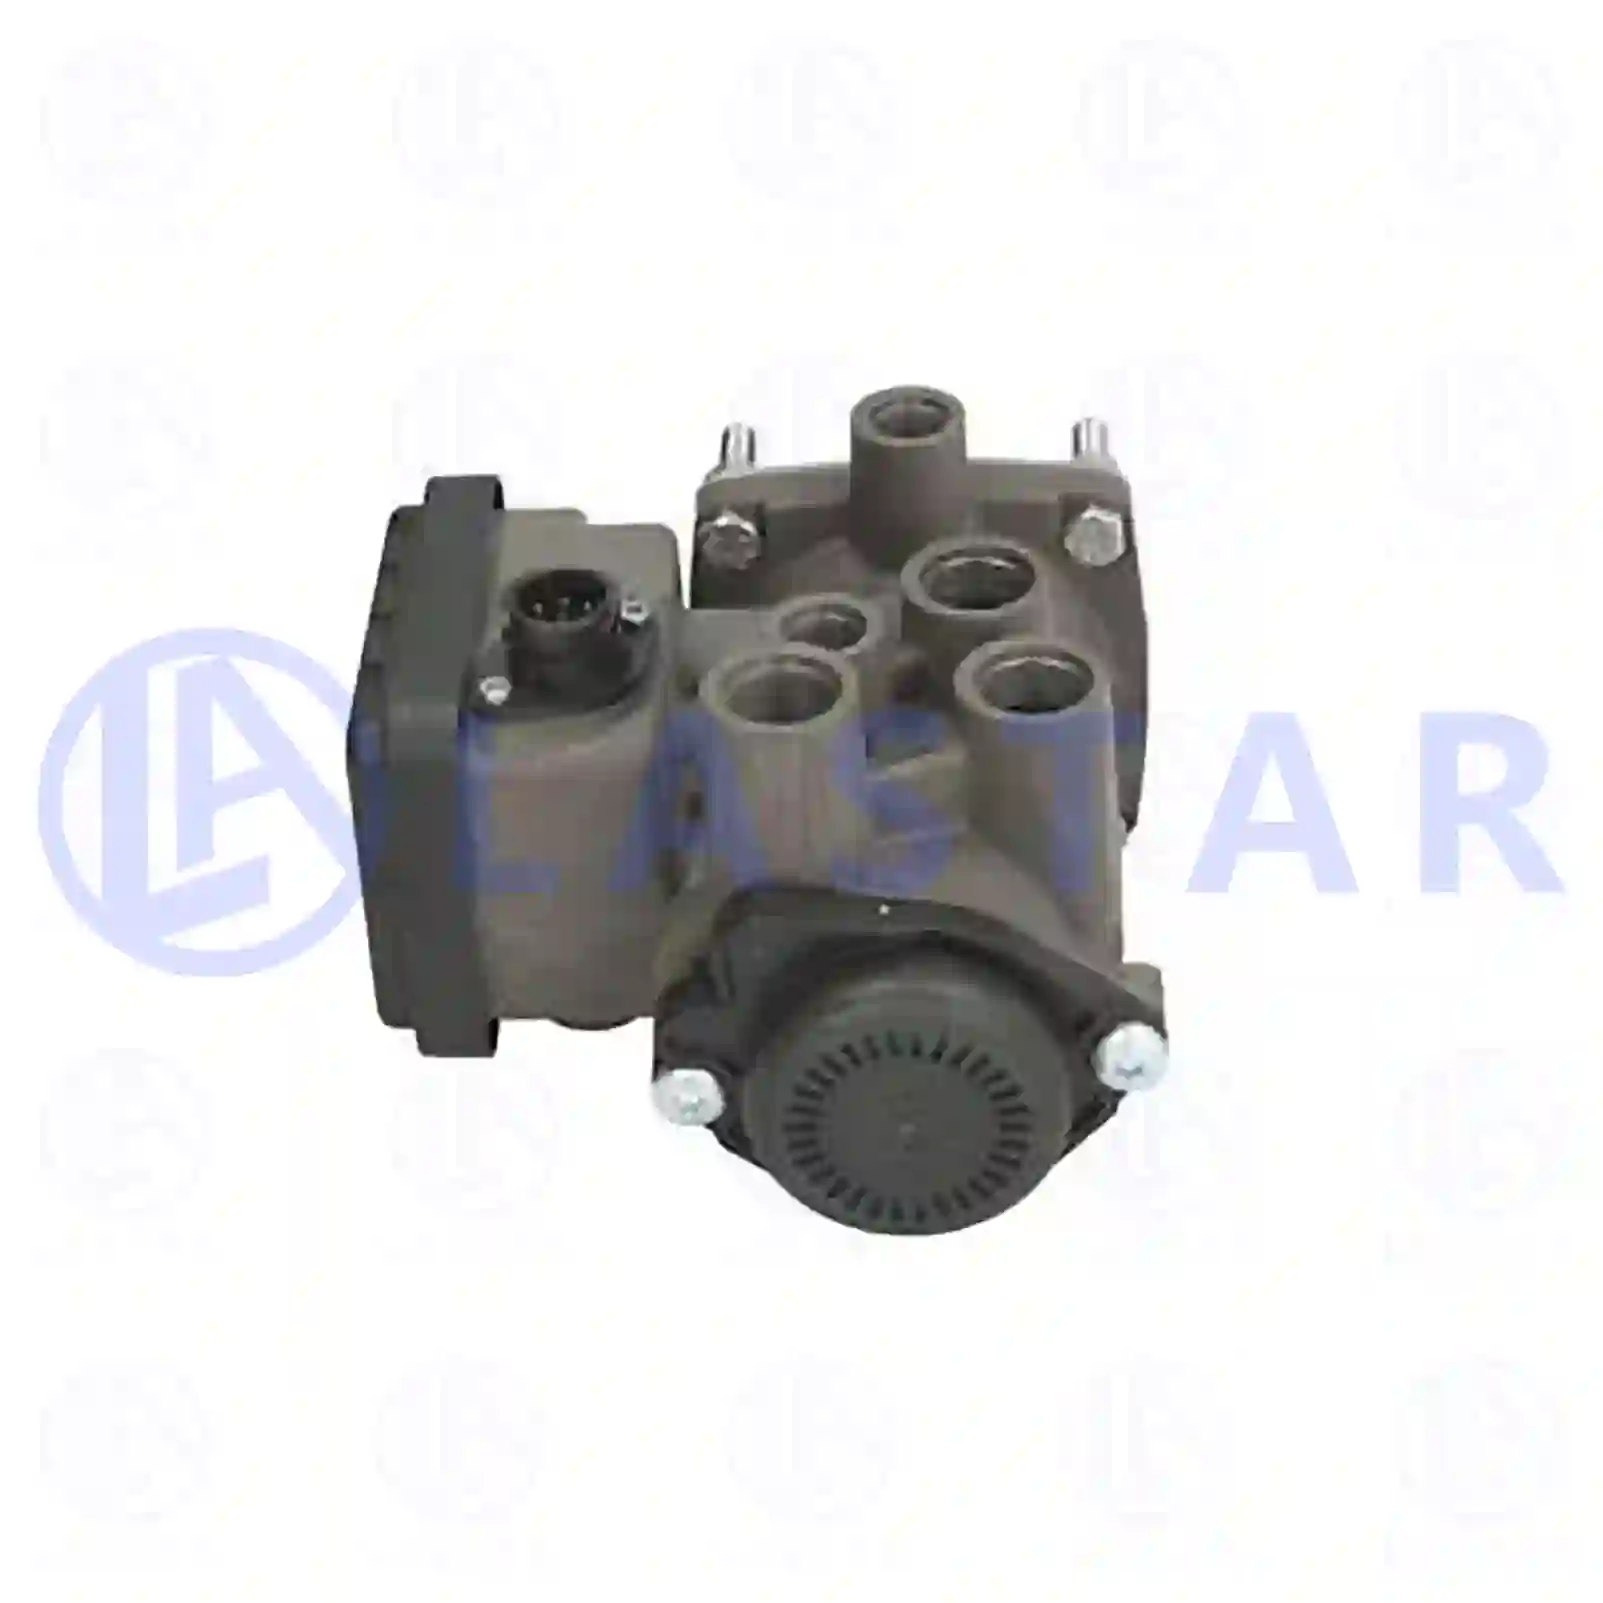 Modulating valve, reman. / without old core, 77714000, 20456402, 2112203 ||  77714000 Lastar Spare Part | Truck Spare Parts, Auotomotive Spare Parts Modulating valve, reman. / without old core, 77714000, 20456402, 2112203 ||  77714000 Lastar Spare Part | Truck Spare Parts, Auotomotive Spare Parts